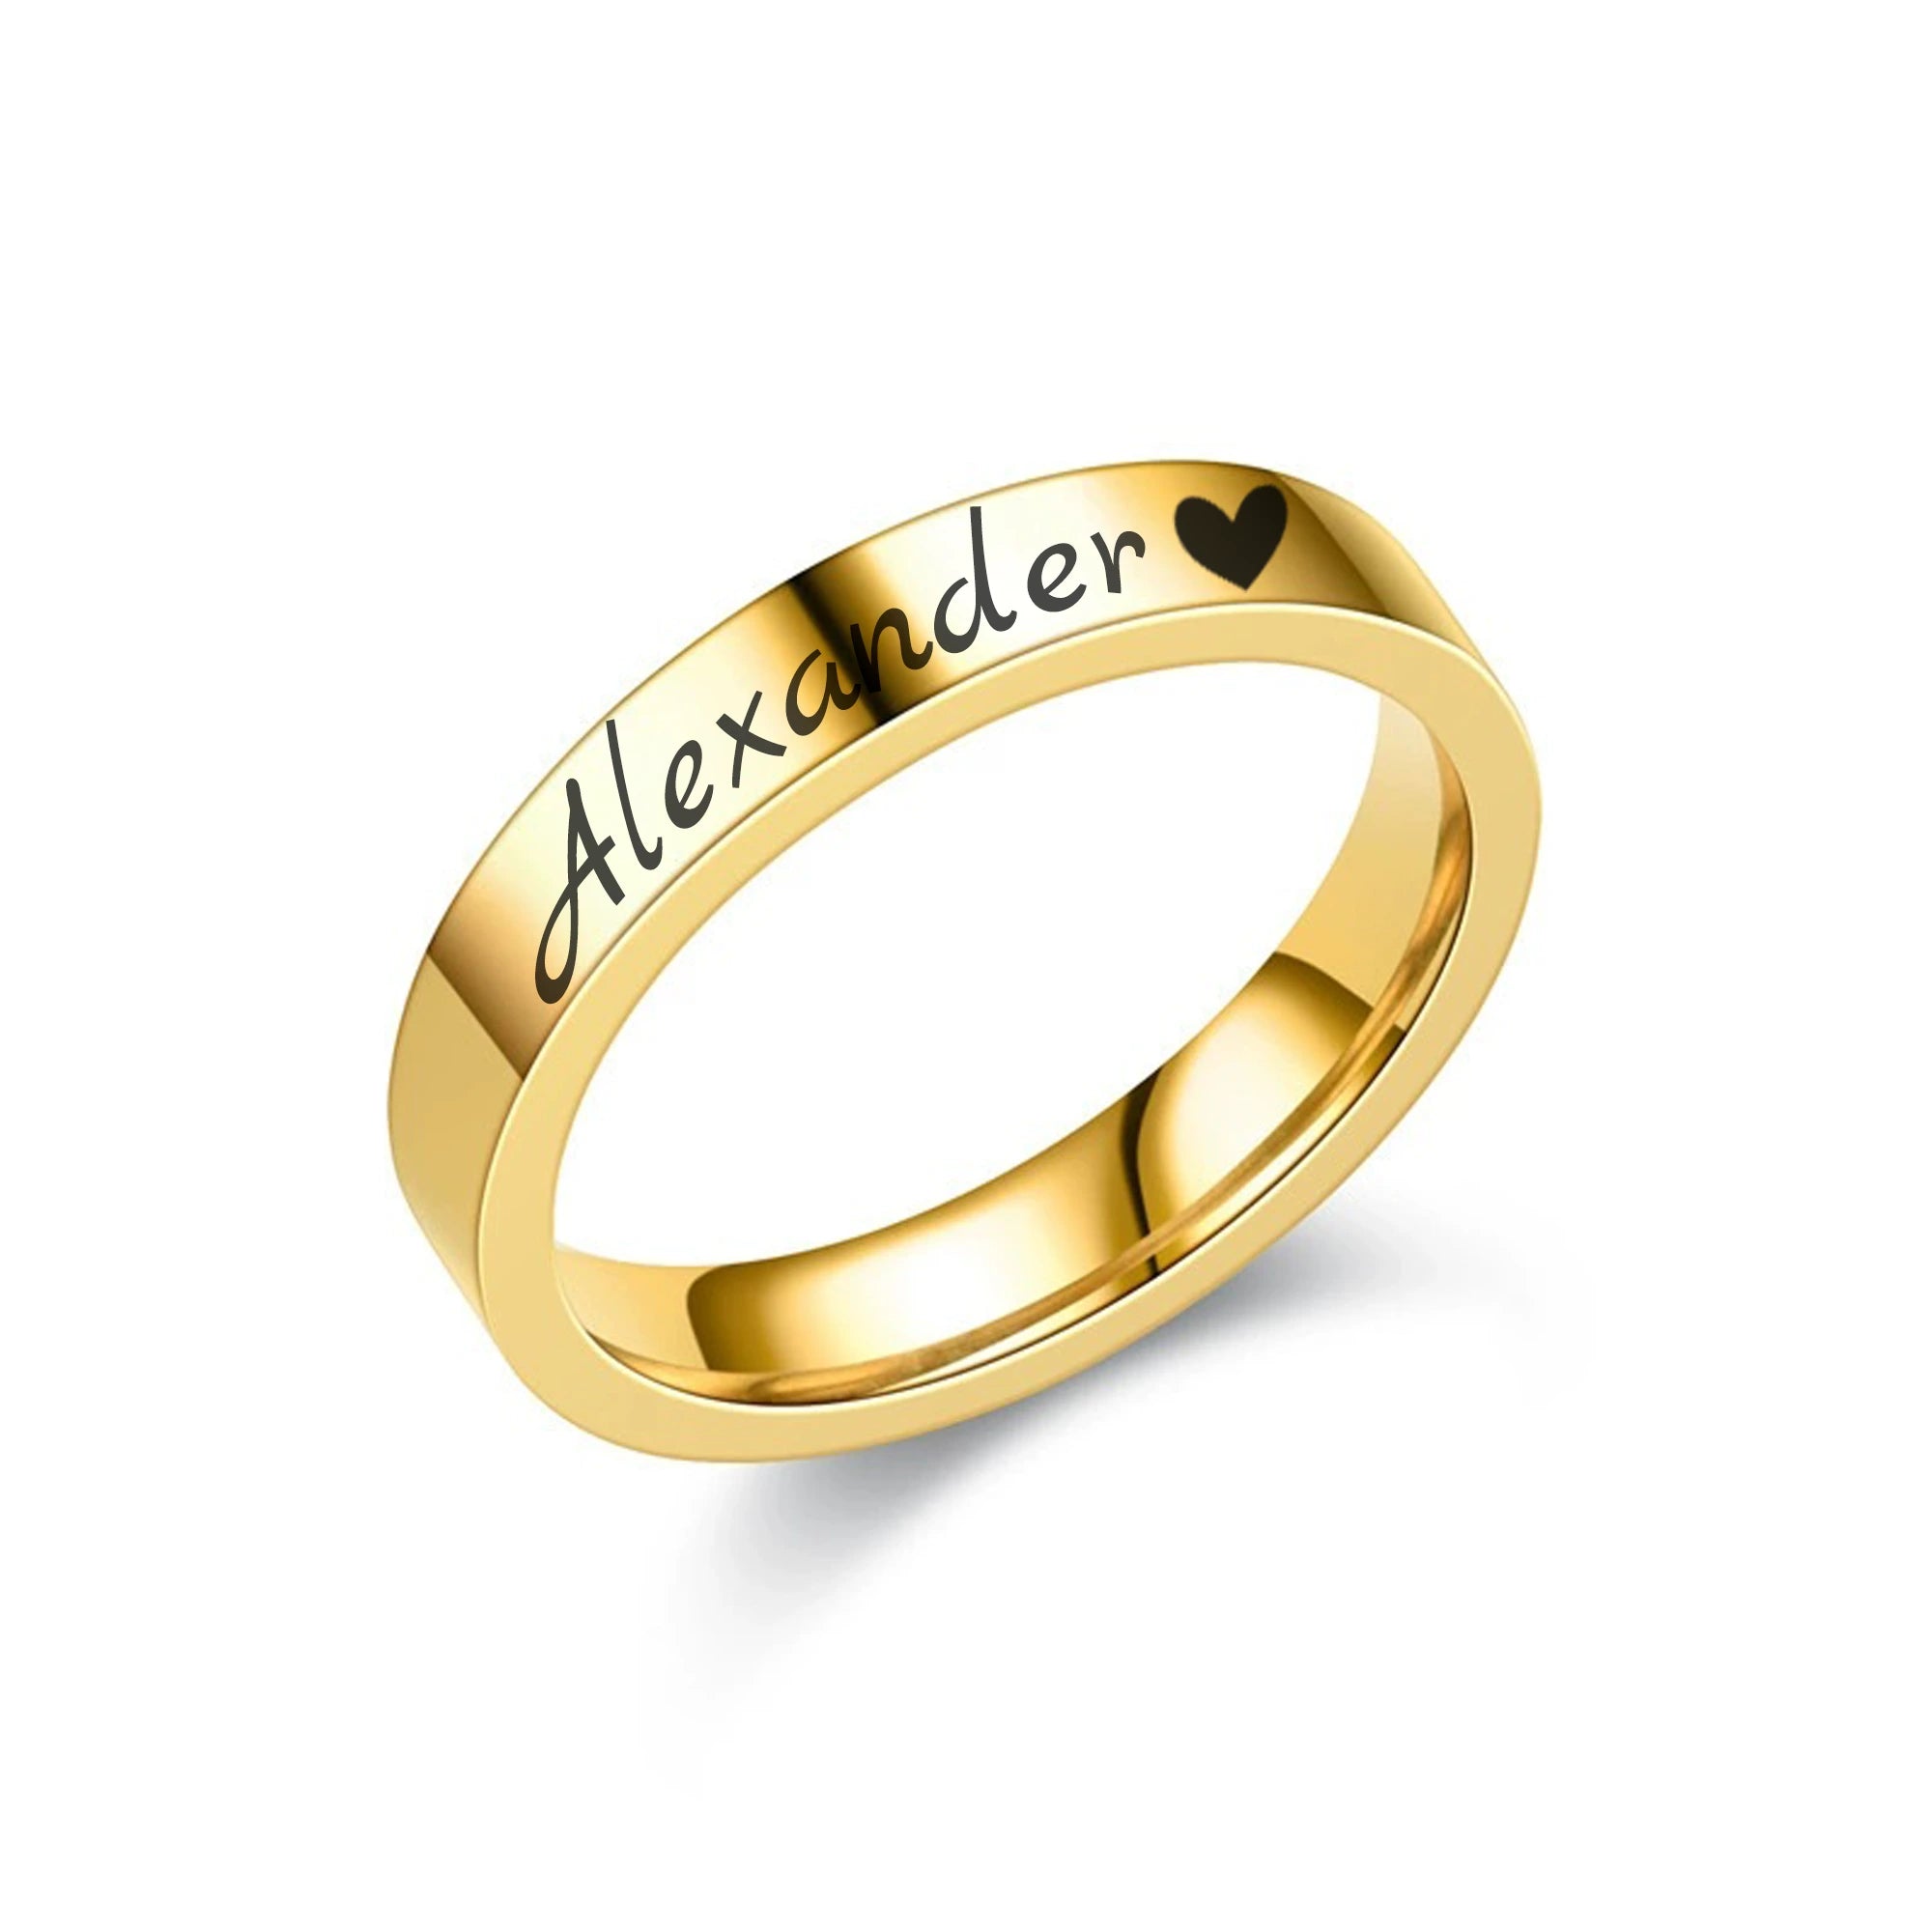 Personalized Stacking Rings with Name, Perfect for Couples